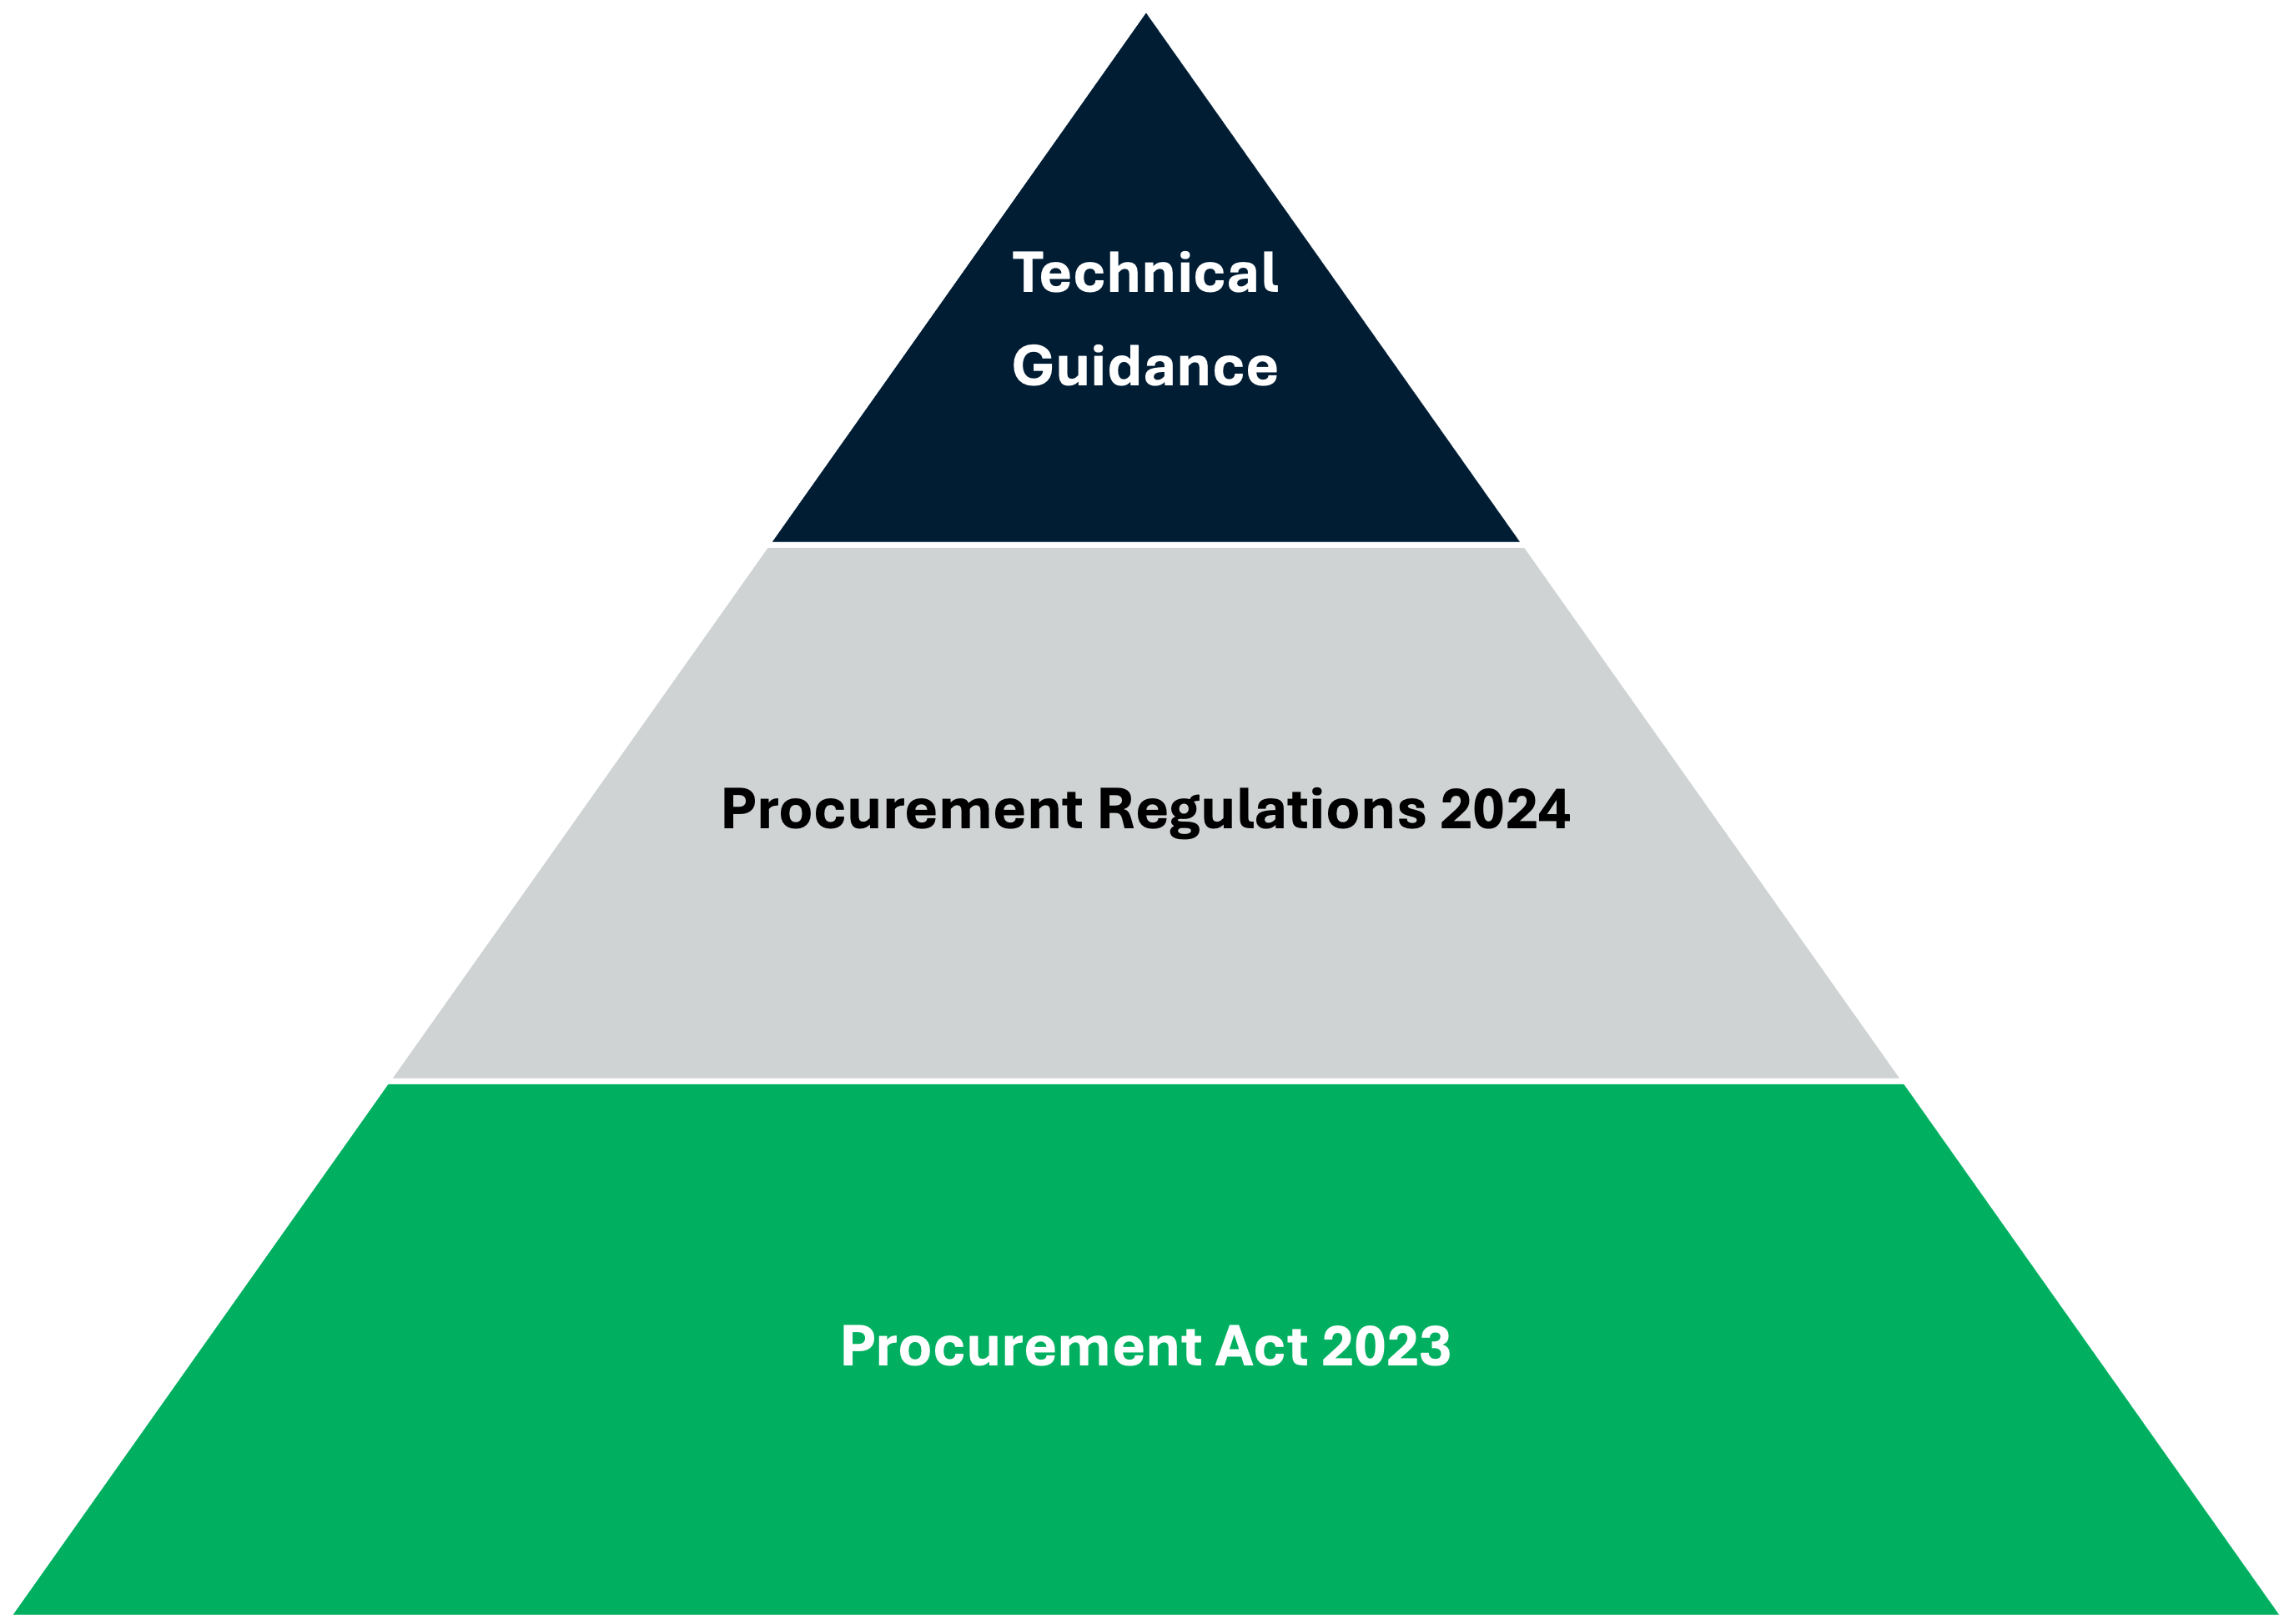 Figure 1: the Procurement Act 2023 as the foundation of what is next 